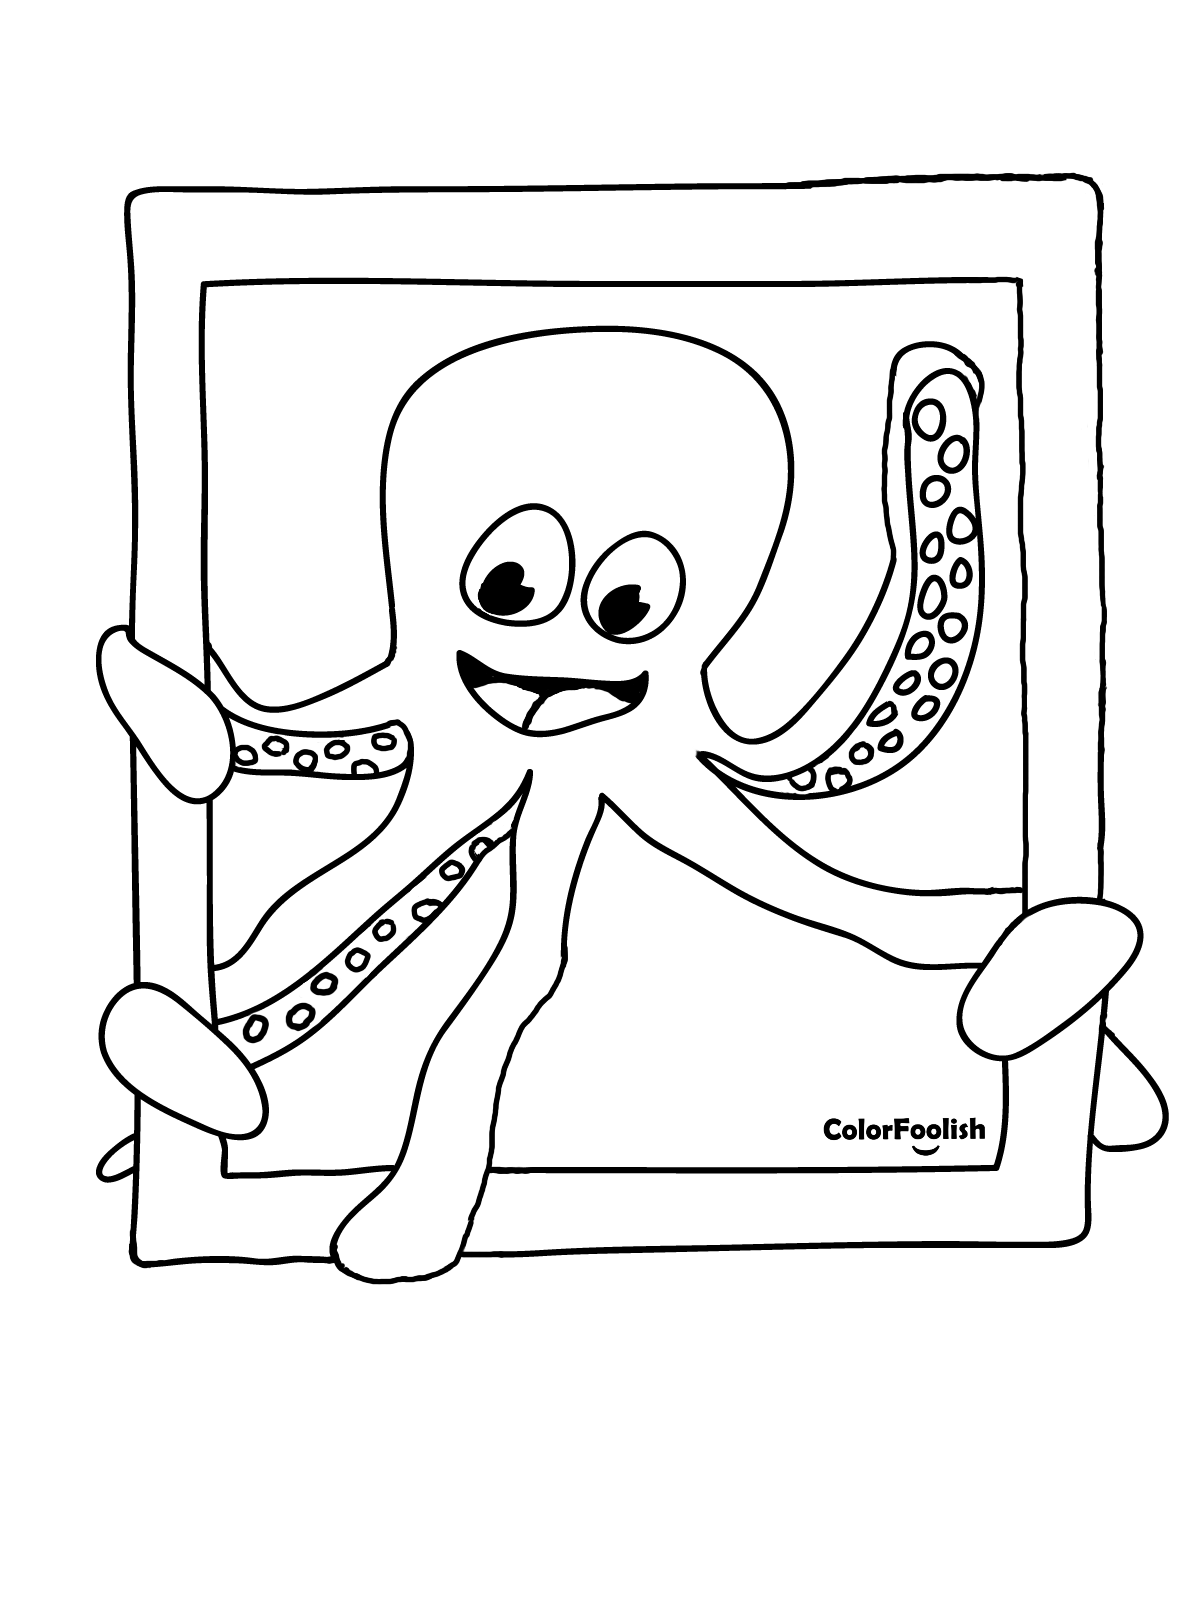 Coloring page of a squid waving inside a frame